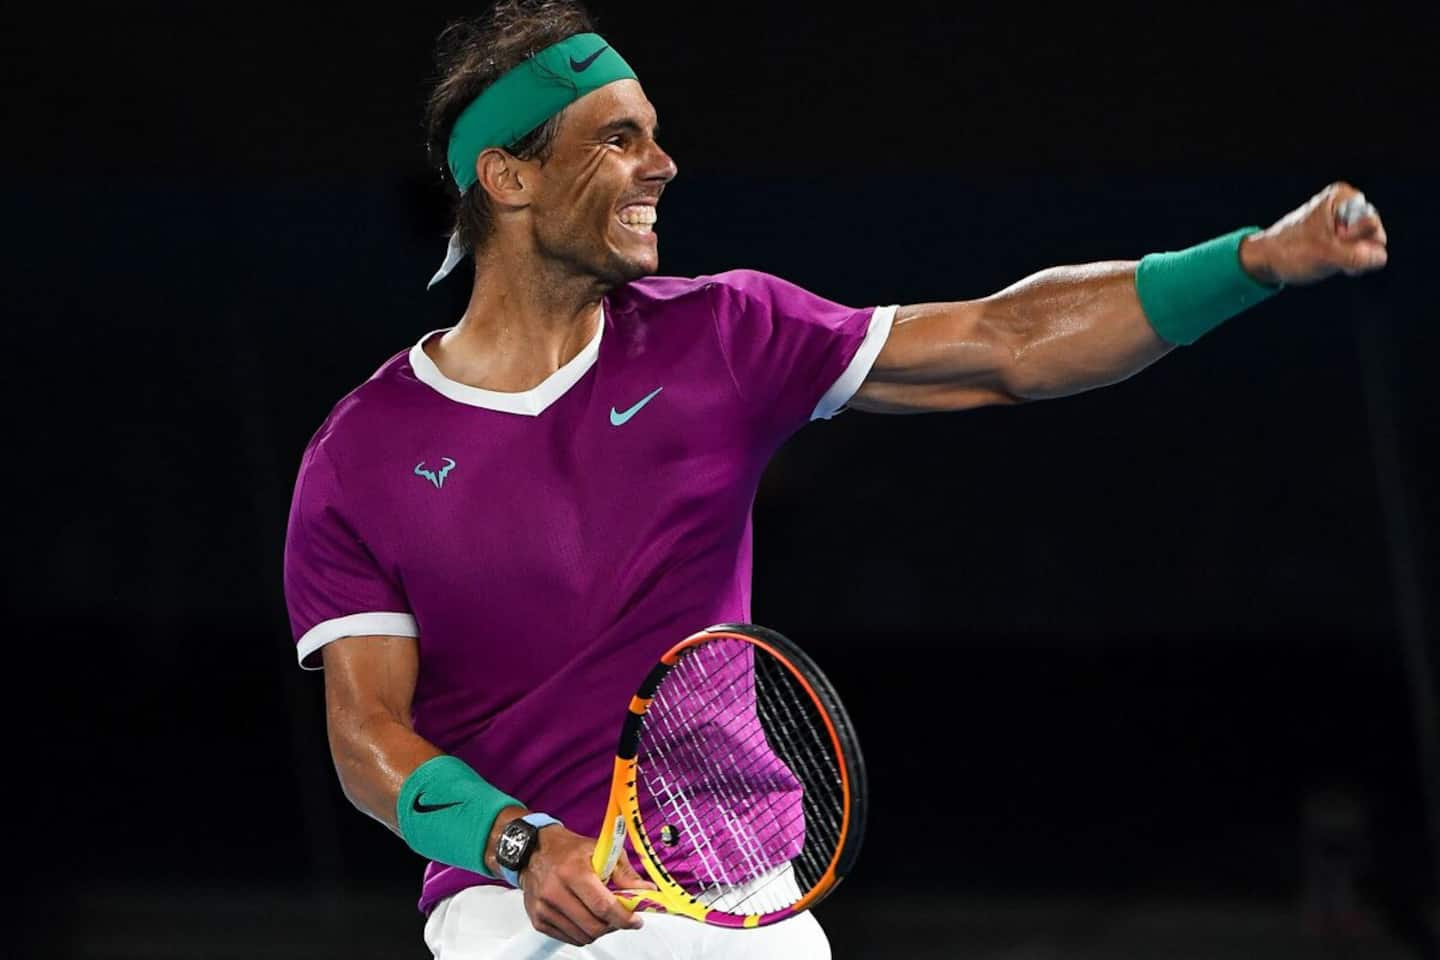 Montreal will welcome Nadal, Félix, “Shapo” and many others